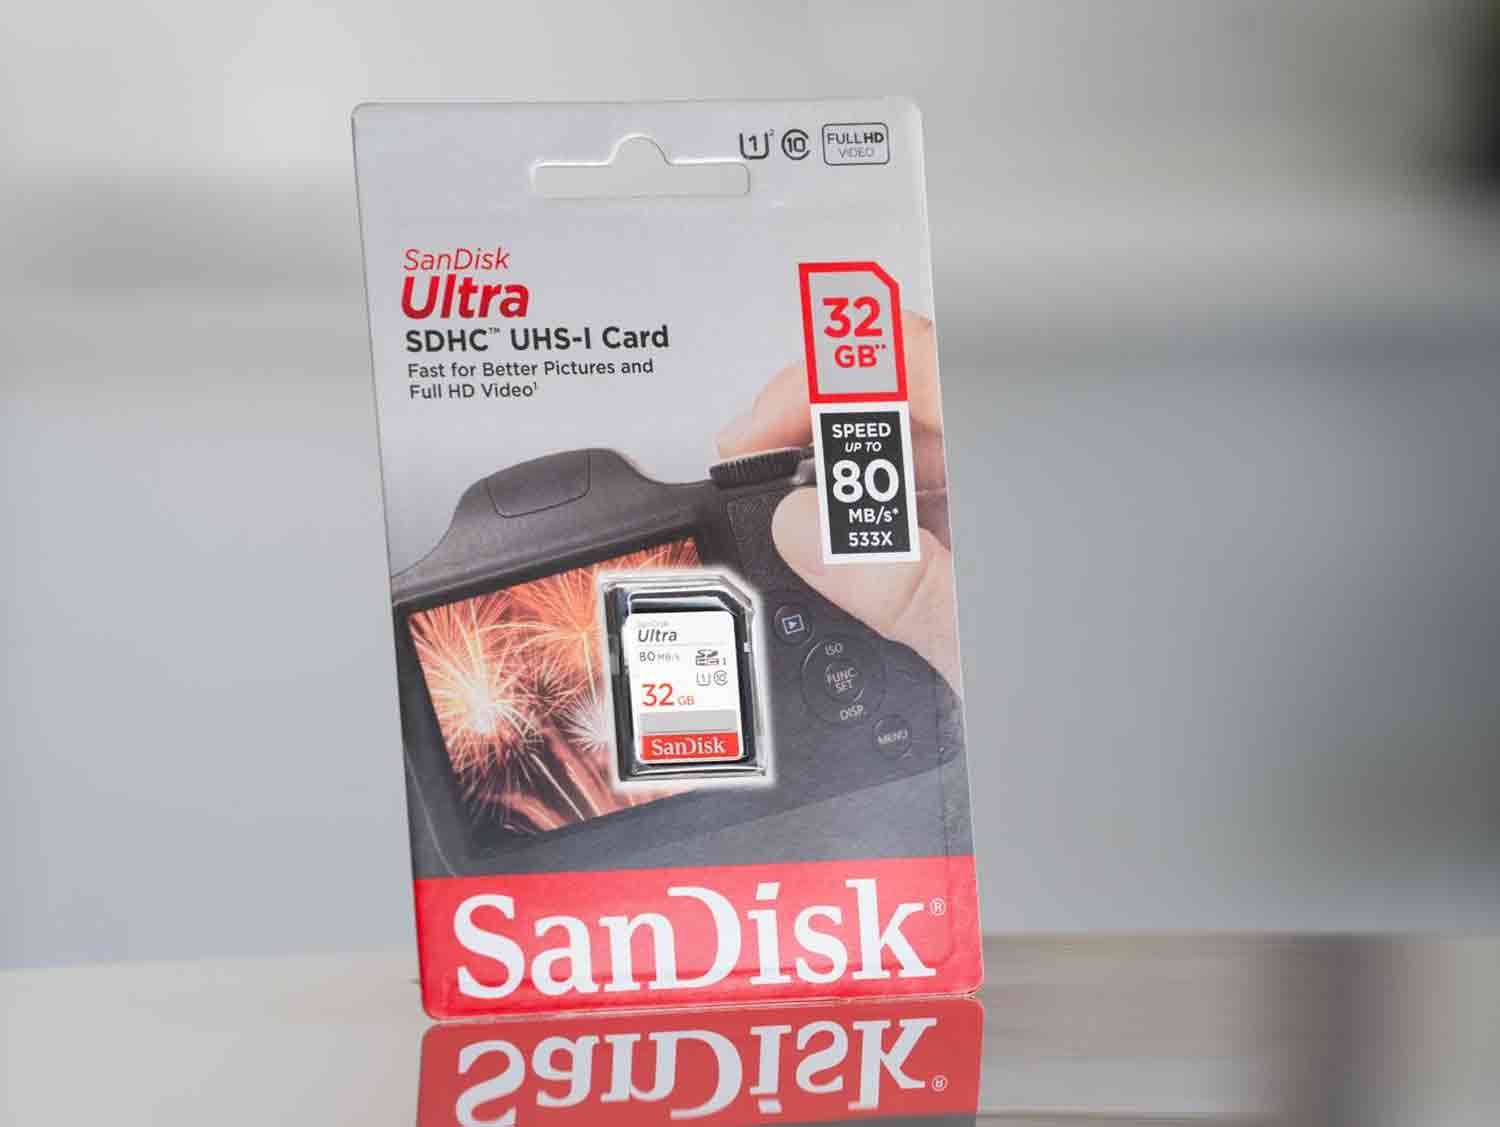 SanDisk Ultra 32GB Class 10 SDHC UHS-I Memory Card